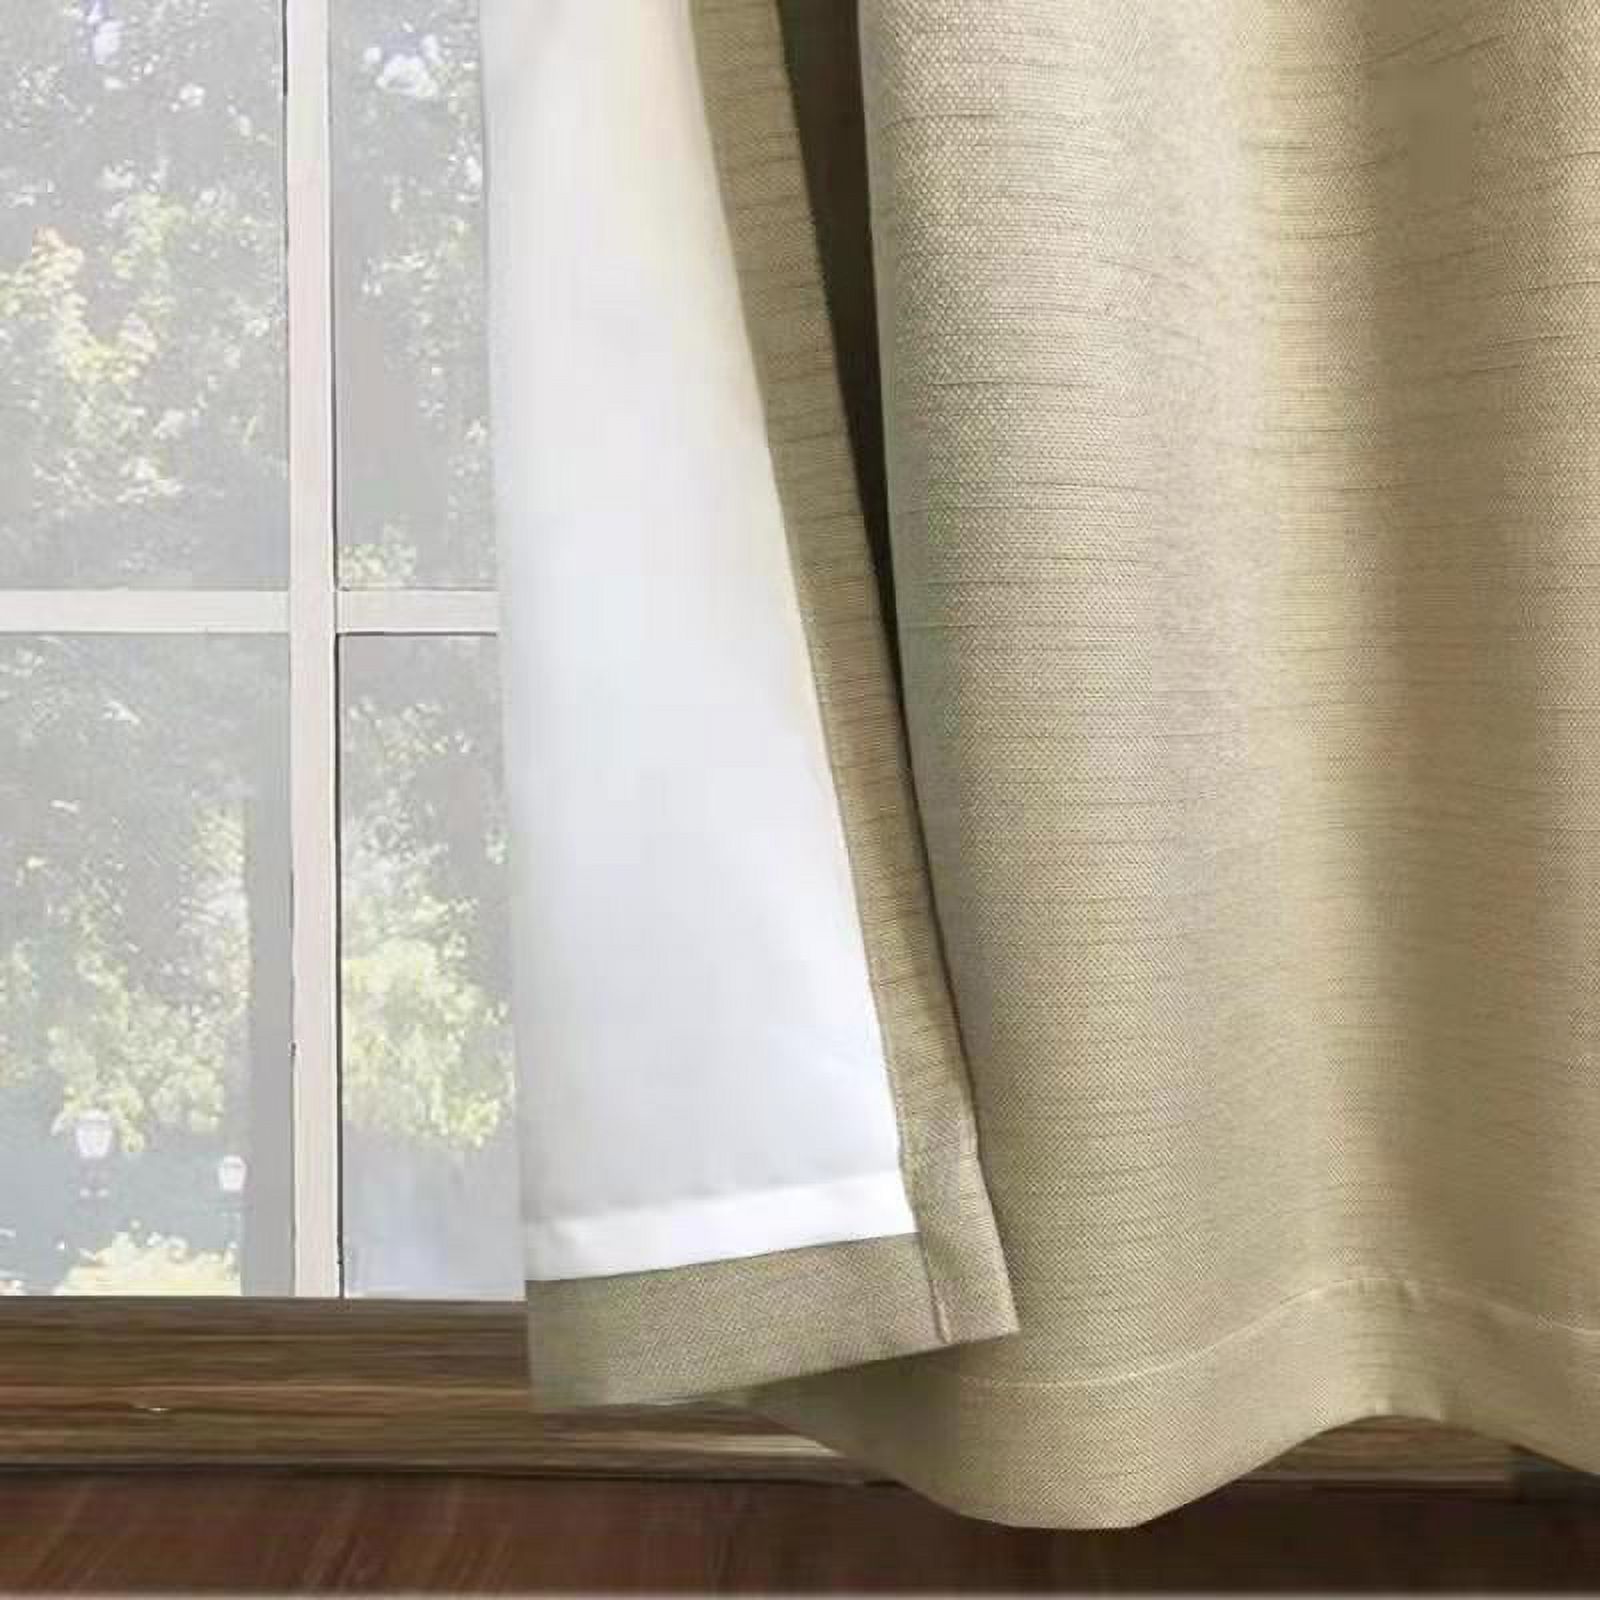 Better Homes & Gardens Basketweave Curtain Panel, 50" x 84", Beige - image 3 of 6